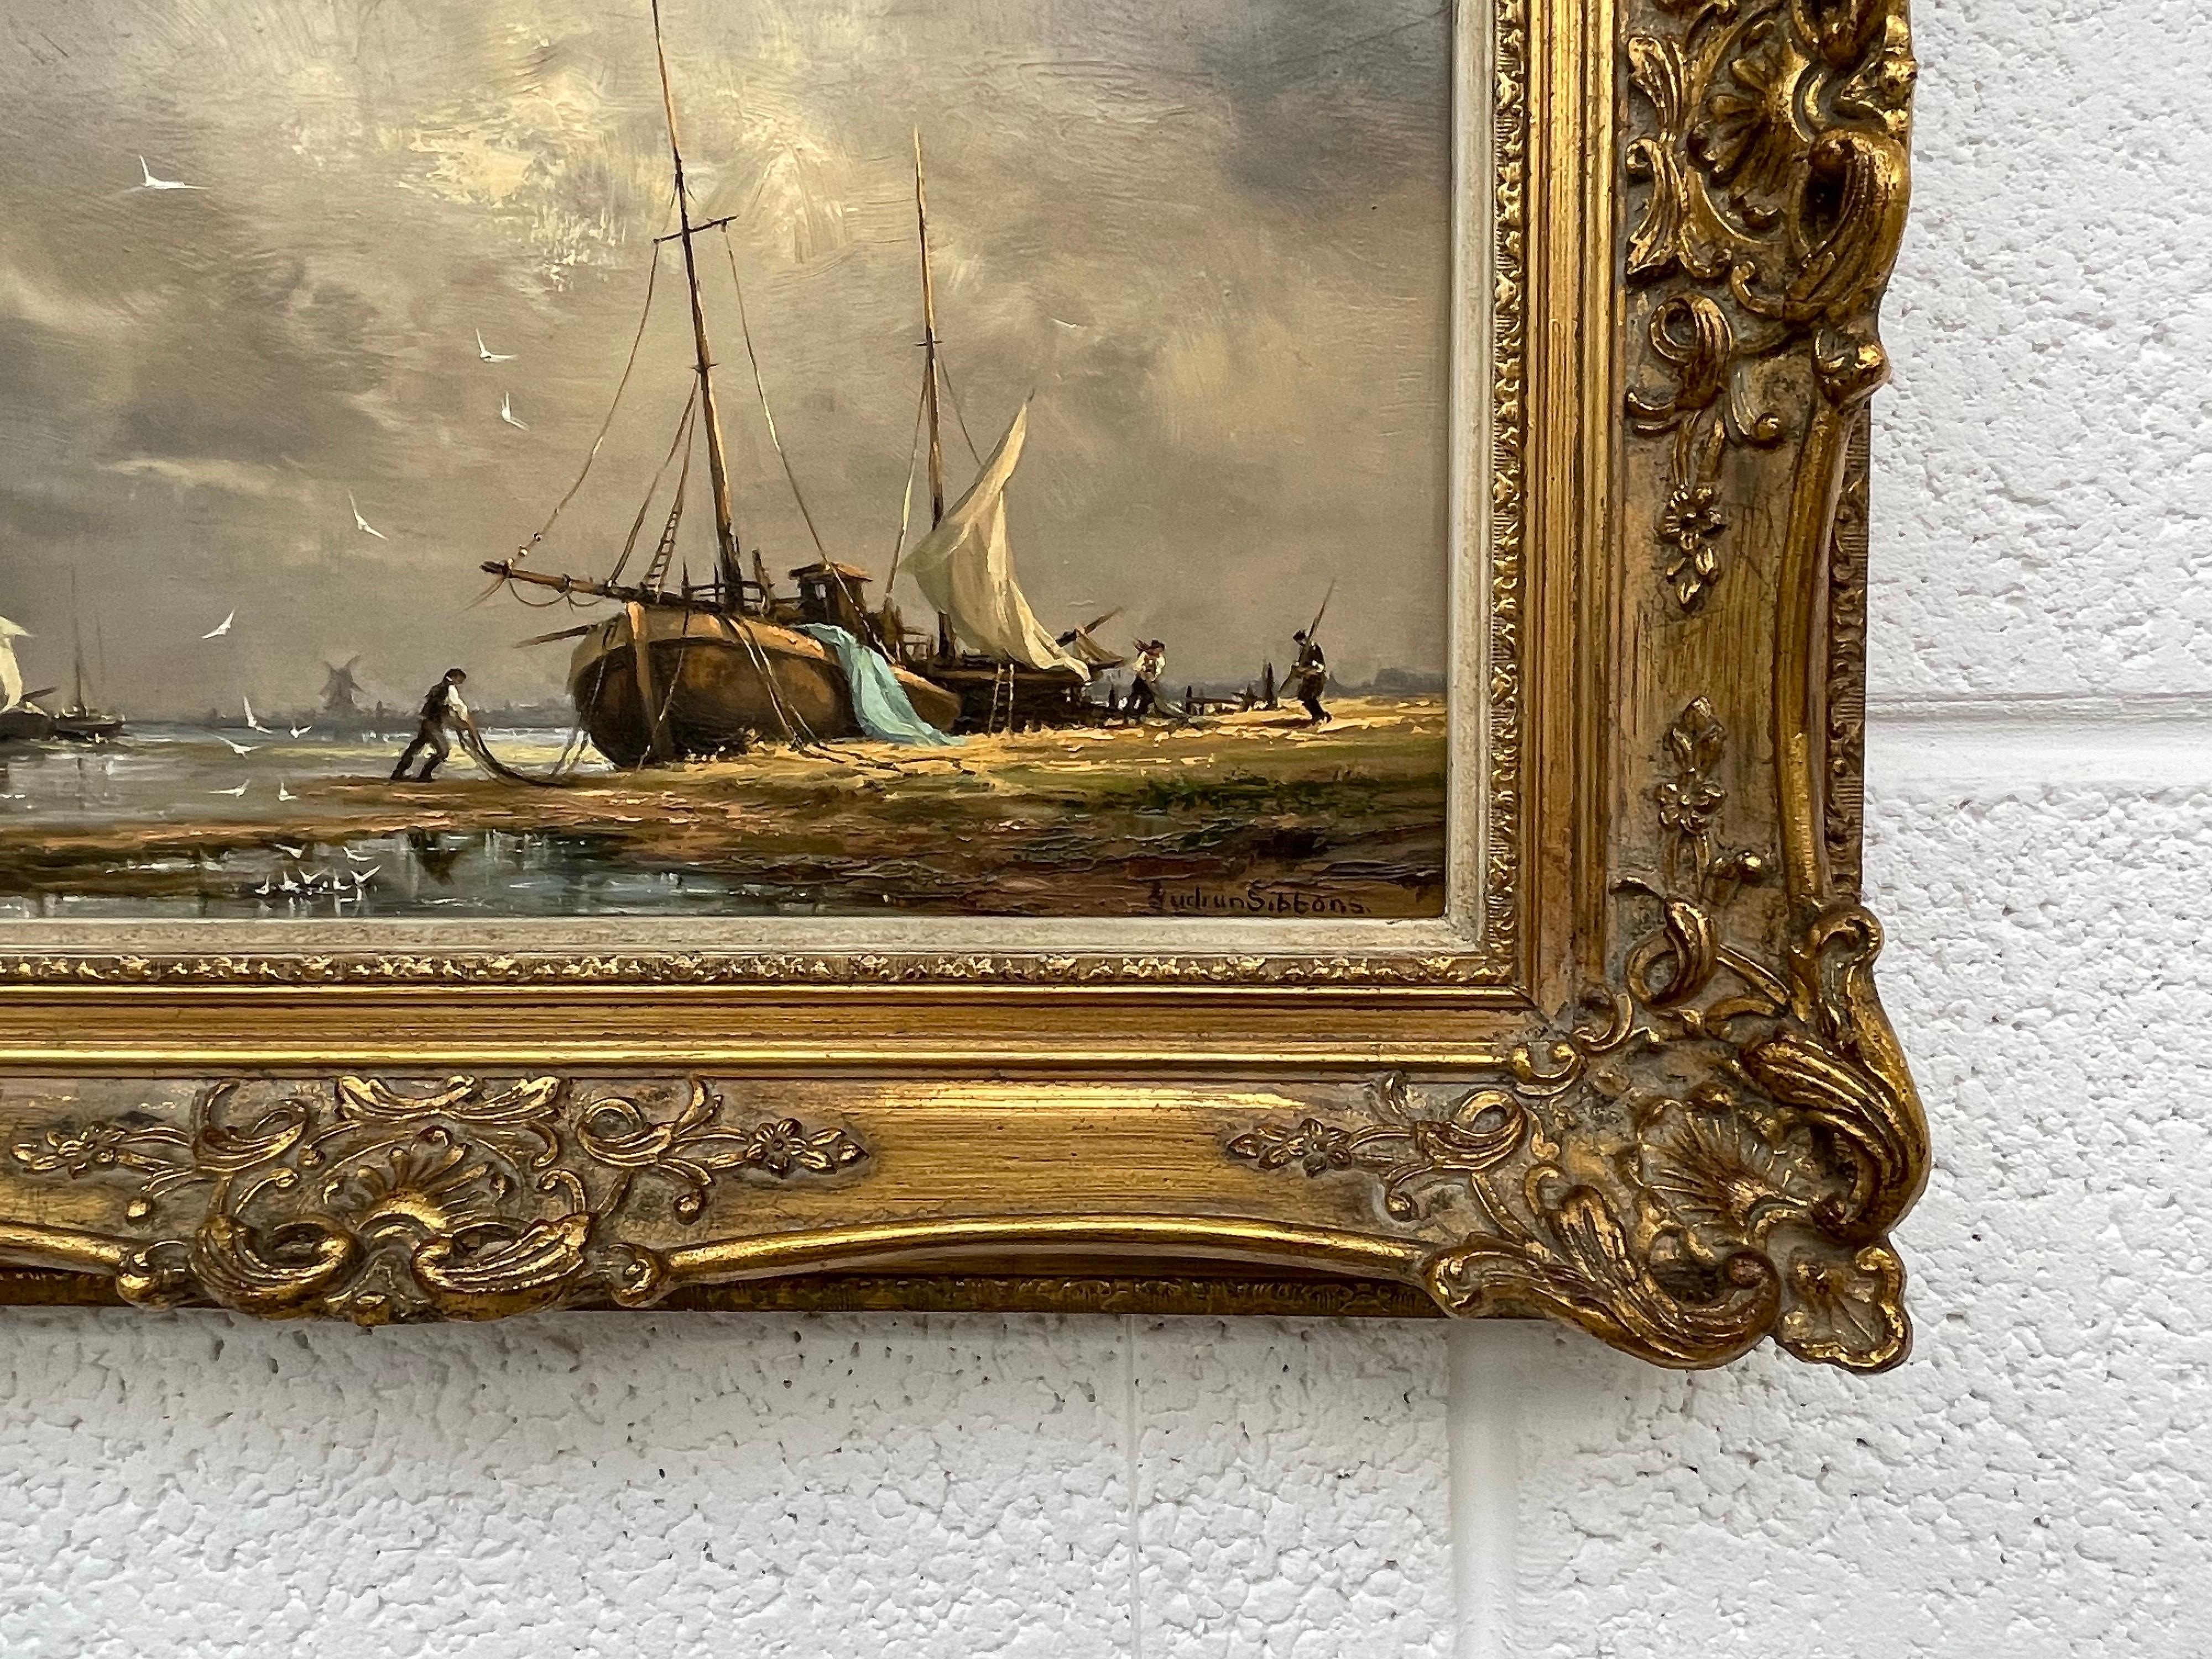 Gudrun Sibbons (1925- ) German-born British Artist. 

Original Oil Painting of Estuary Scene with Beached Fishing Boat & Figures. 
Oil on Board, Signed. Framed in a period ornate moulding.

Art measures 16 x 12 inches
Frame measures 22 x 18